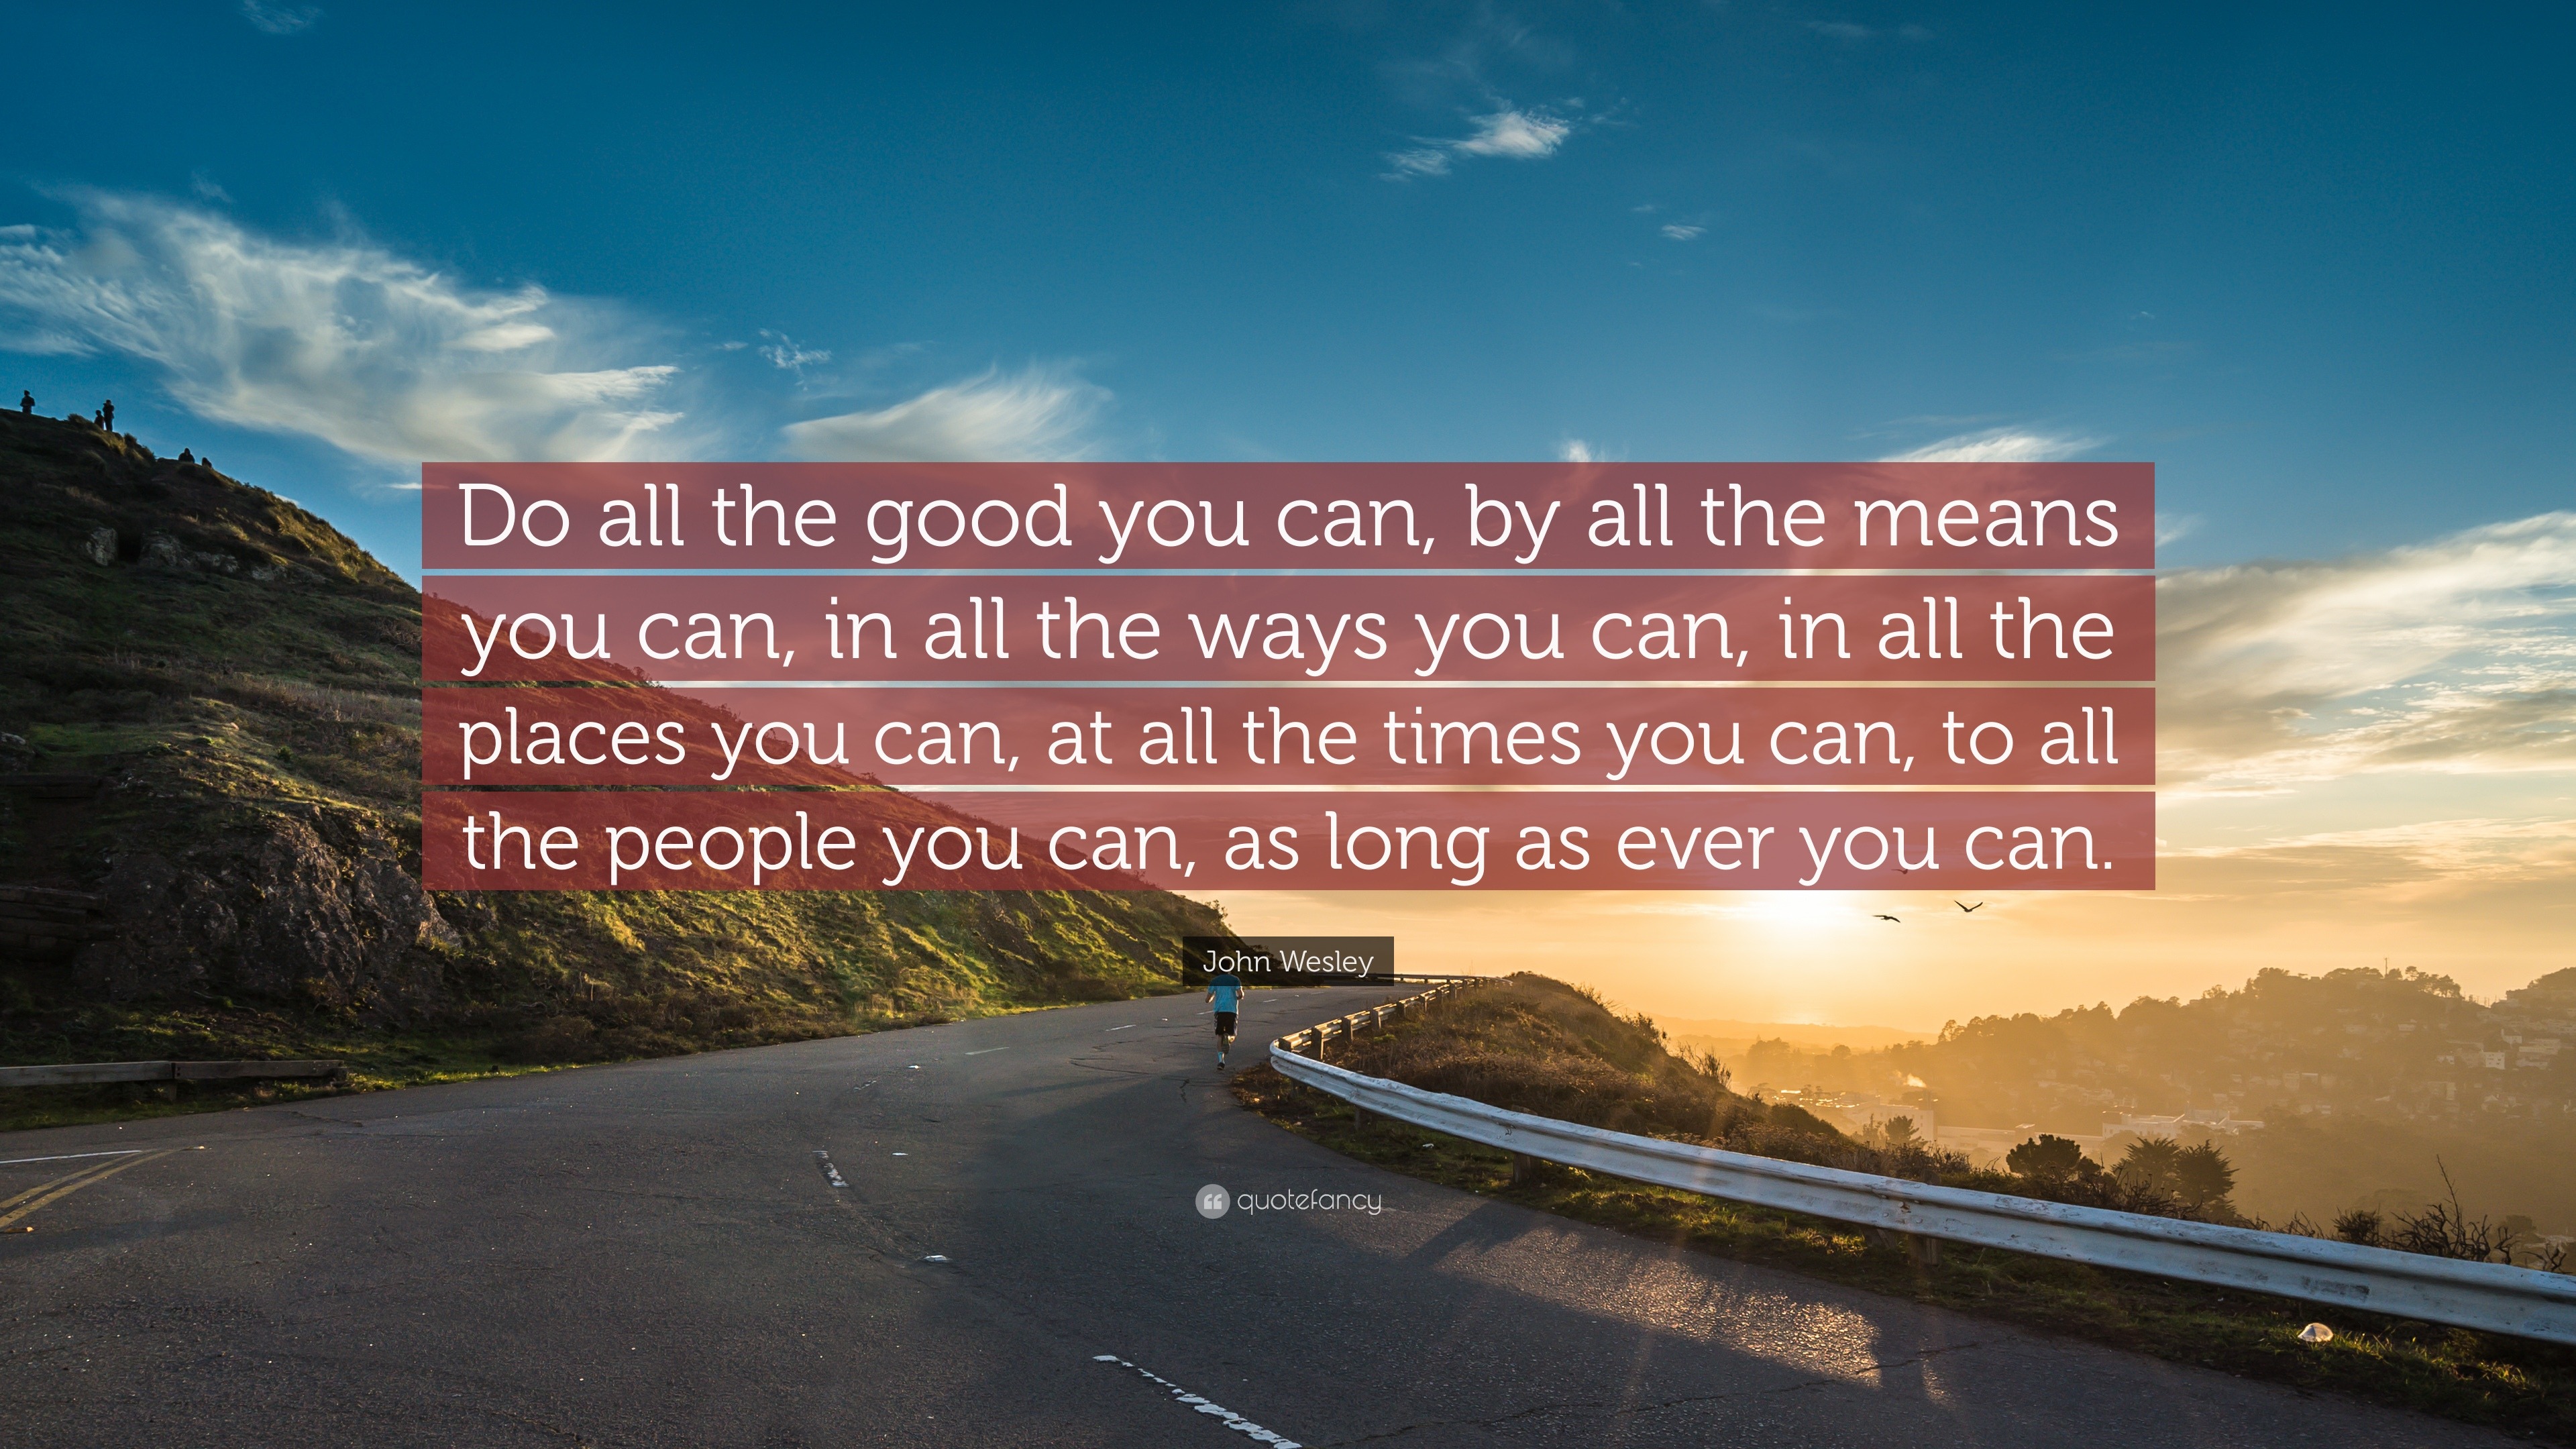 John Wesley Quote: “Do all the good you can, by all the means you